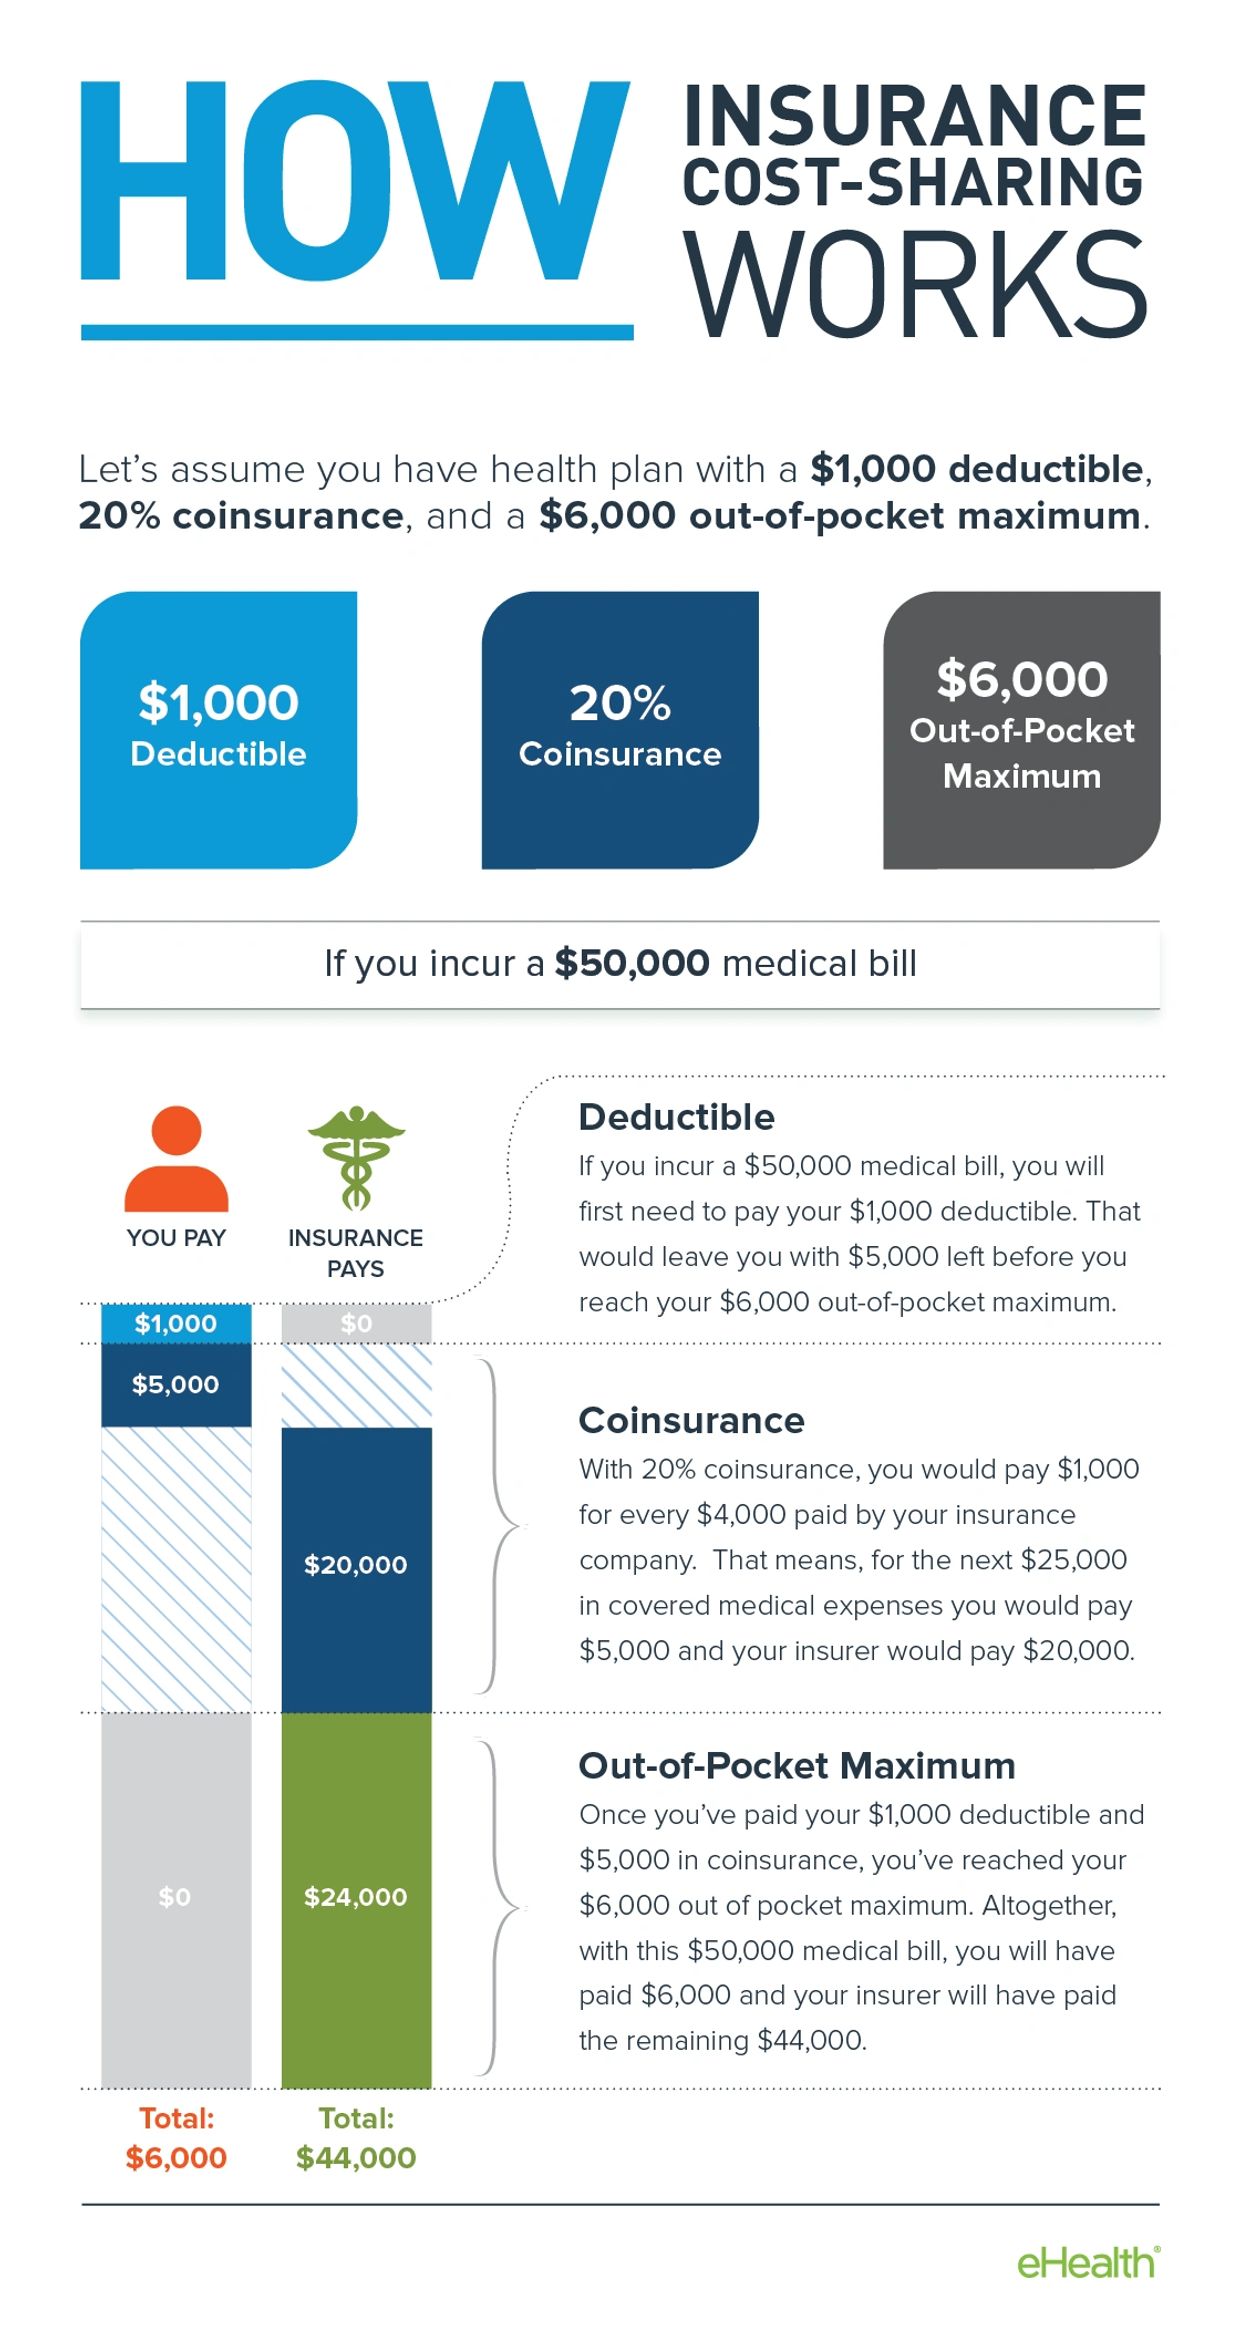 Does Insurance Pay for Physical Therapy? - Insurify